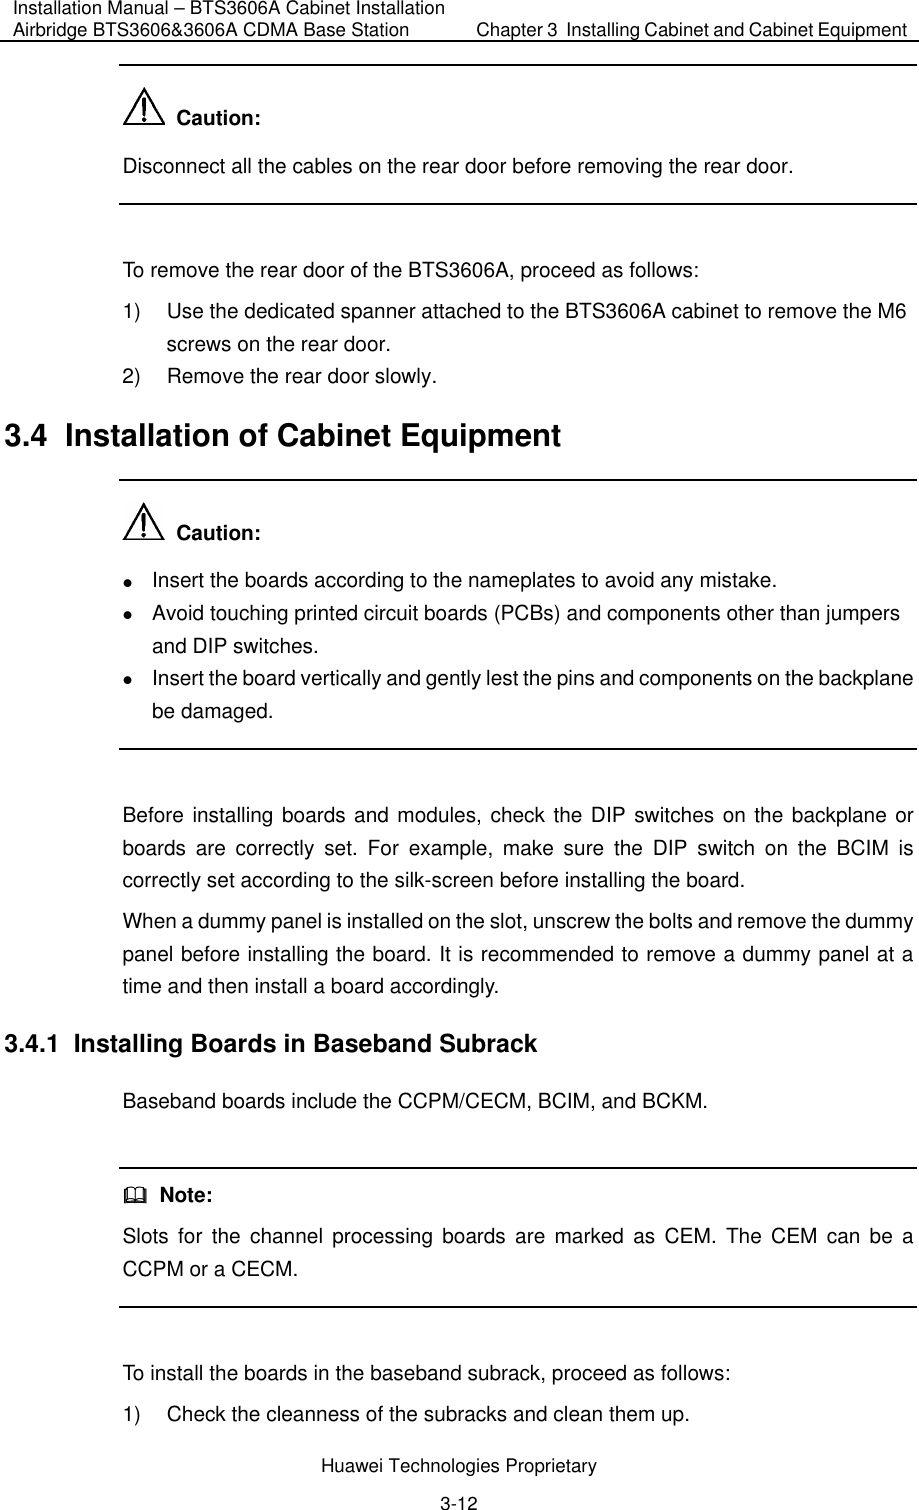 Installation Manual – BTS3606A Cabinet Installation Airbridge BTS3606&amp;3606A CDMA Base Station  Chapter 3  Installing Cabinet and Cabinet Equipment  Huawei Technologies Proprietary 3-12   Caution: Disconnect all the cables on the rear door before removing the rear door.  To remove the rear door of the BTS3606A, proceed as follows:  1)  Use the dedicated spanner attached to the BTS3606A cabinet to remove the M6 screws on the rear door. 2)  Remove the rear door slowly. 3.4  Installation of Cabinet Equipment   Caution: z Insert the boards according to the nameplates to avoid any mistake. z Avoid touching printed circuit boards (PCBs) and components other than jumpers and DIP switches. z Insert the board vertically and gently lest the pins and components on the backplane be damaged.  Before installing boards and modules, check the DIP switches on the backplane or boards are correctly set. For example, make sure the DIP switch on the BCIM is correctly set according to the silk-screen before installing the board. When a dummy panel is installed on the slot, unscrew the bolts and remove the dummy panel before installing the board. It is recommended to remove a dummy panel at a time and then install a board accordingly. 3.4.1  Installing Boards in Baseband Subrack Baseband boards include the CCPM/CECM, BCIM, and BCKM.    Note: Slots for the channel processing boards are marked as CEM. The CEM can be a CCPM or a CECM.  To install the boards in the baseband subrack, proceed as follows:  1)  Check the cleanness of the subracks and clean them up. 